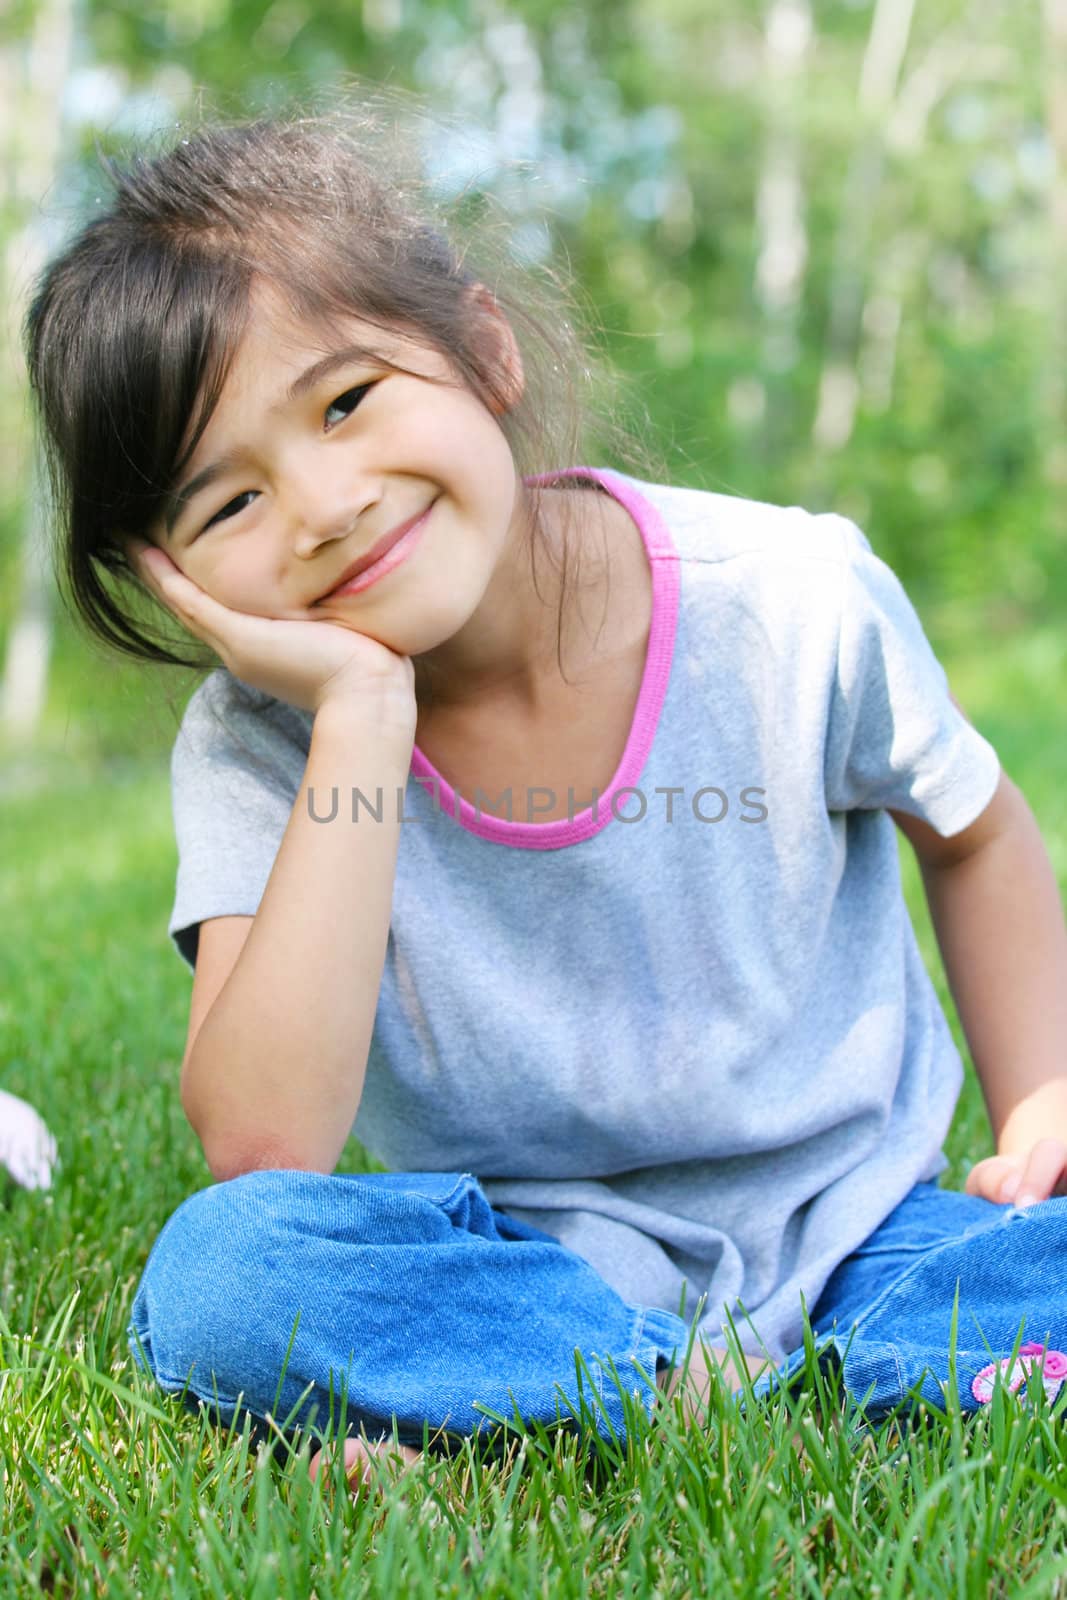 Child sitting on grass with a thoughtful expression. Part asian, scandinavian background.